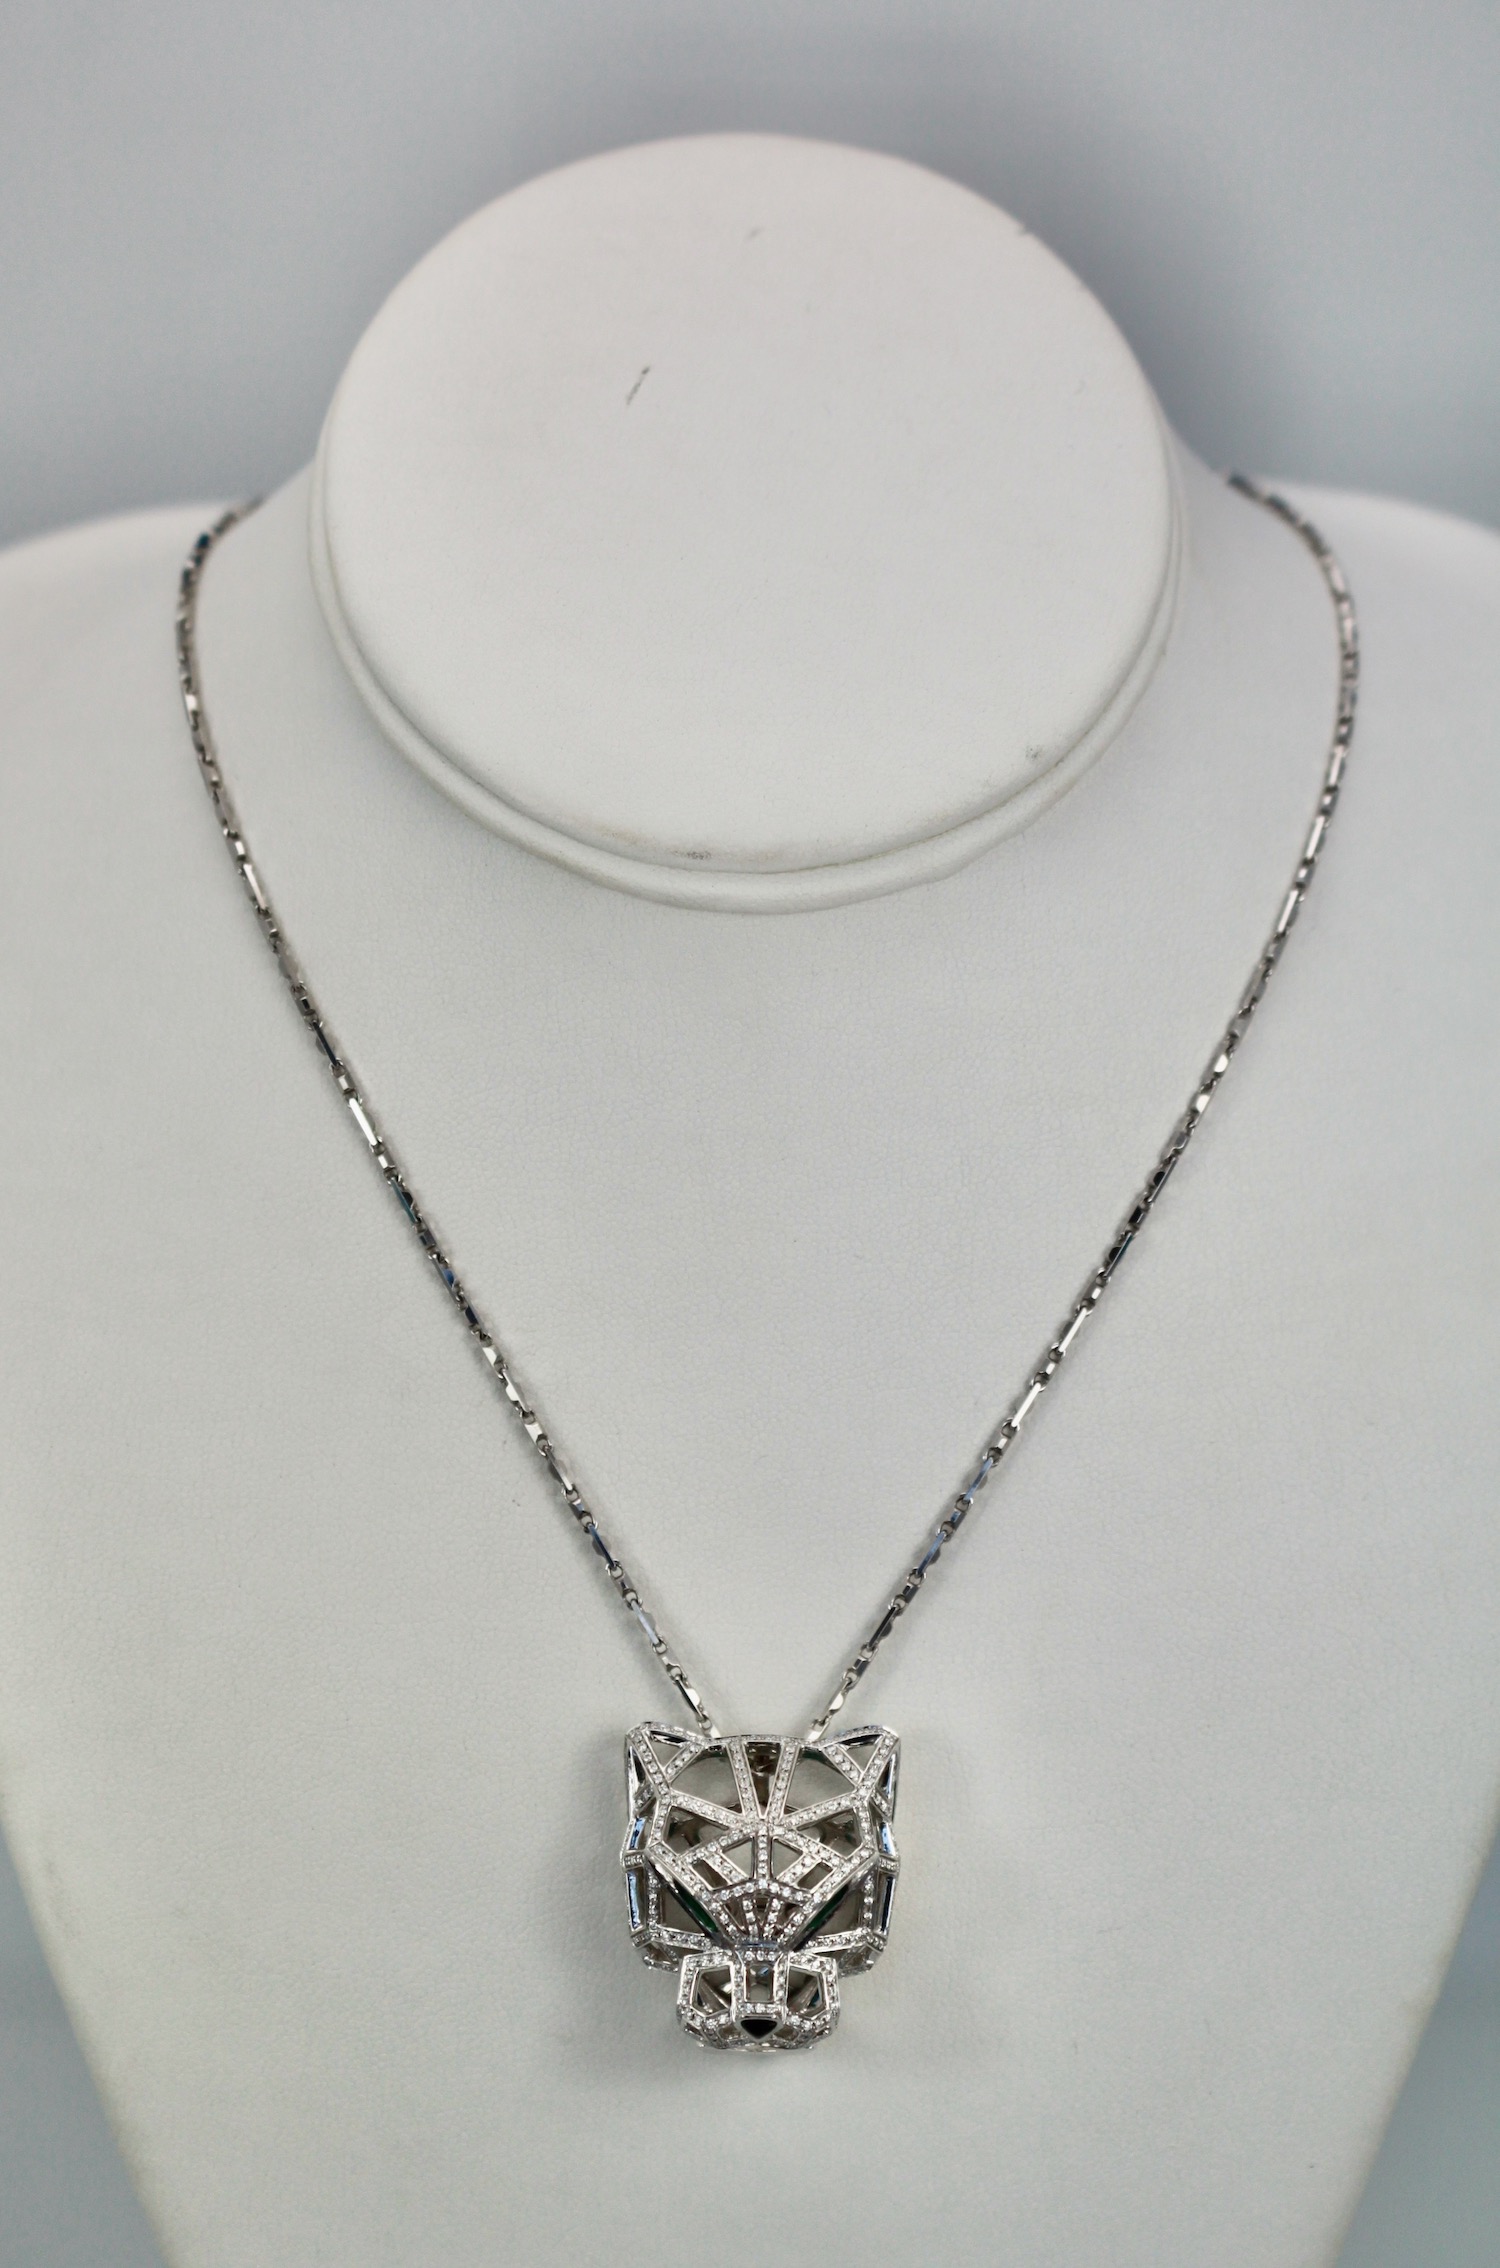 Cartier Diamond Open Panthere Pendant and Necklace – entire on model